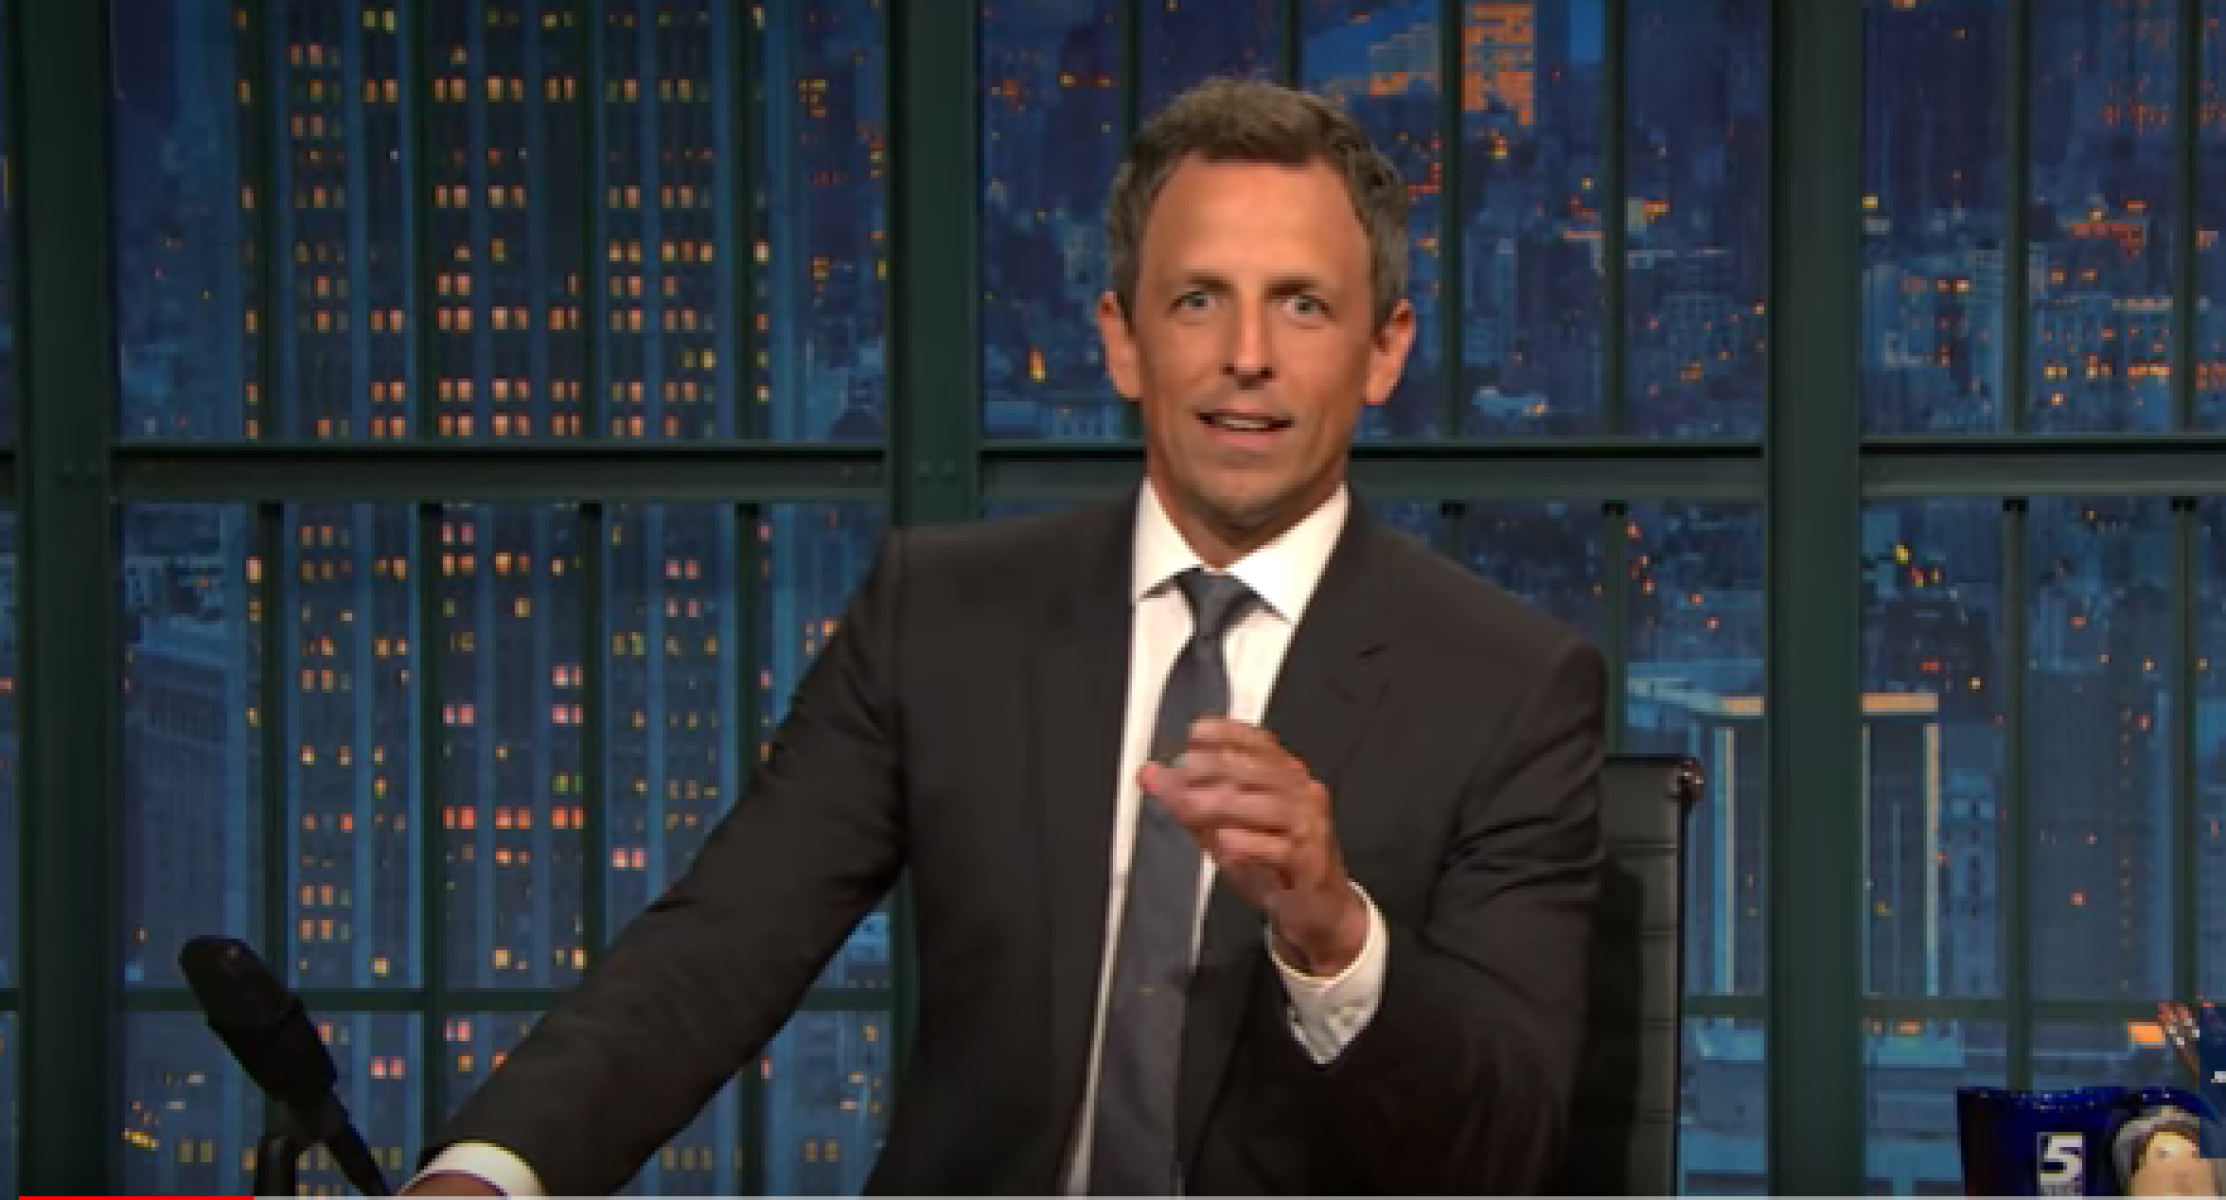 Seth Meyers at his "Late Night" desk